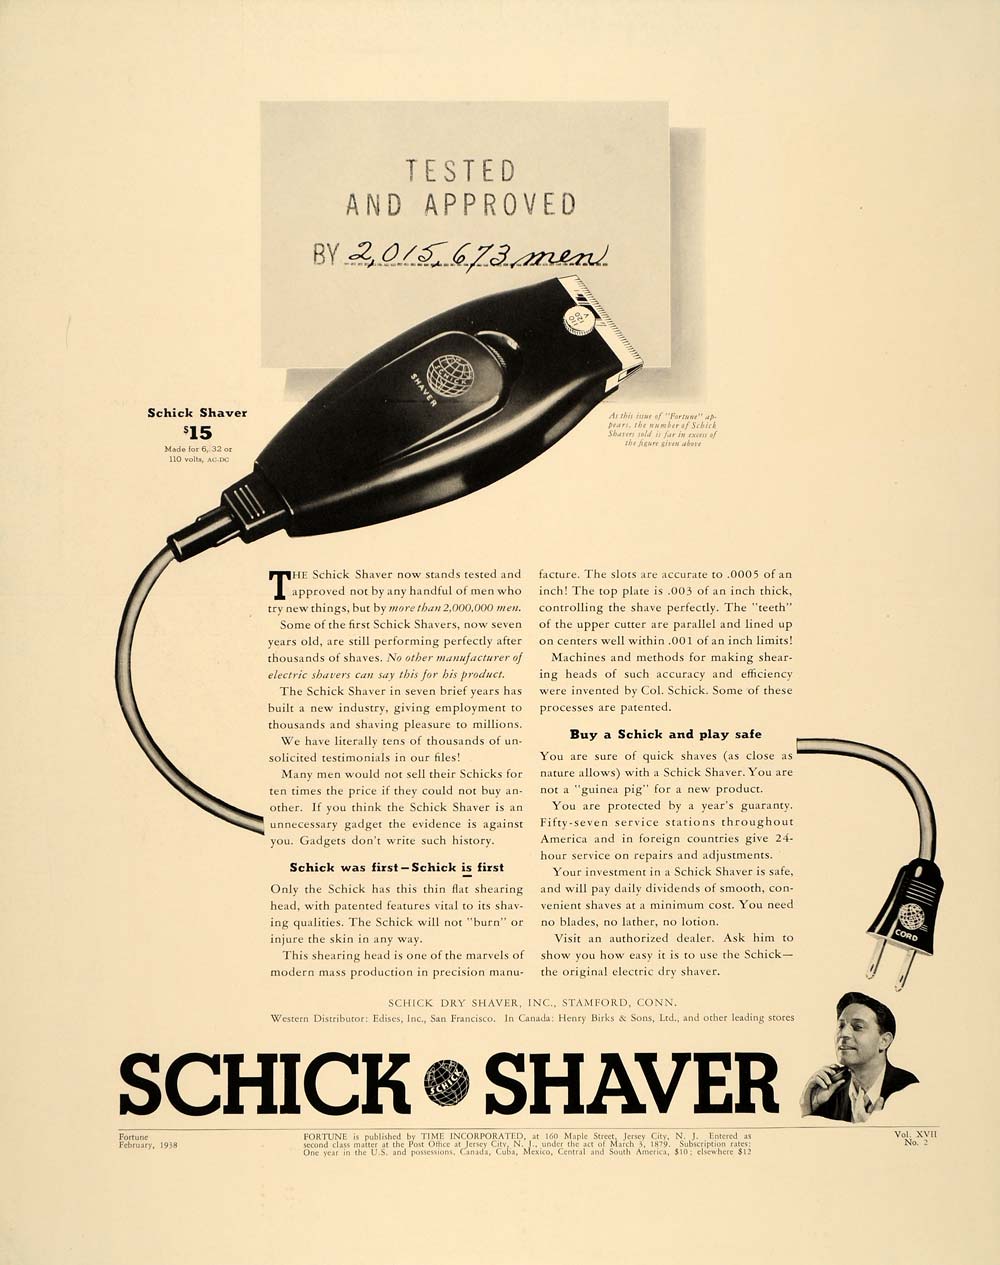 1938 Ad Schick Electric Dry Shaver Stamford Connecticut - ORIGINAL FT7